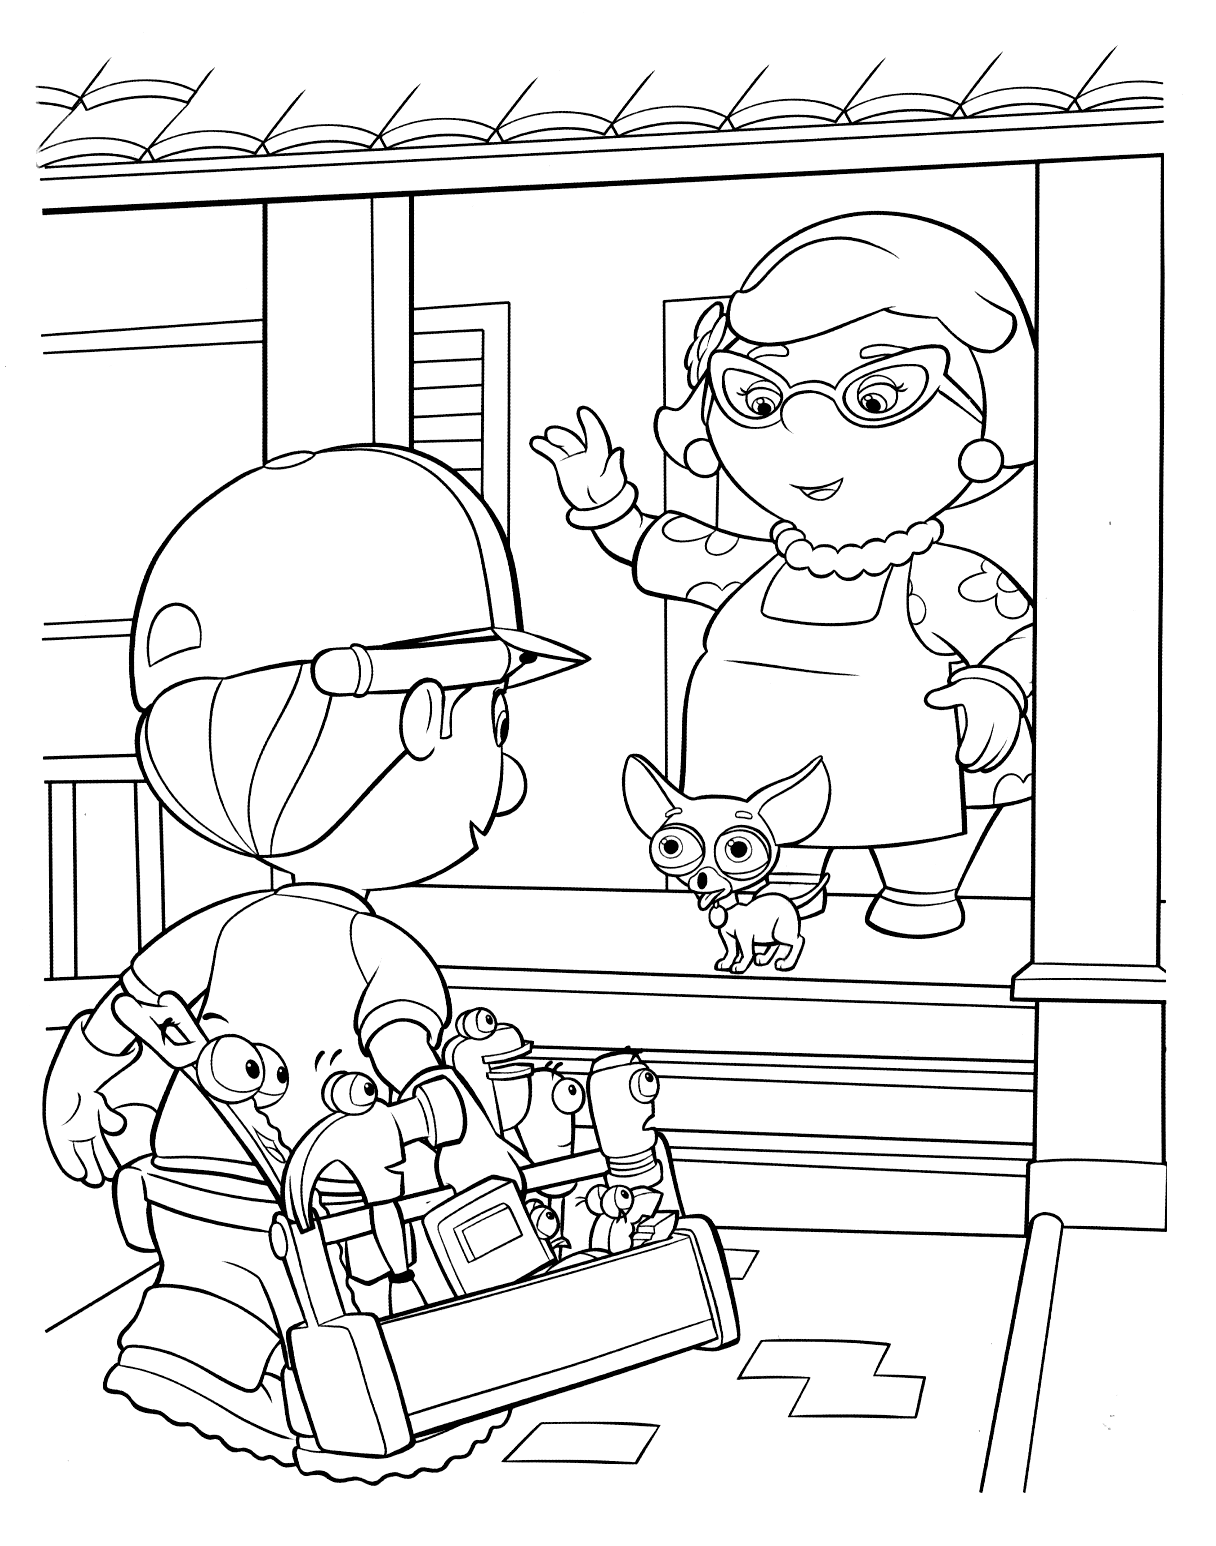 coloring-page-handy-manny